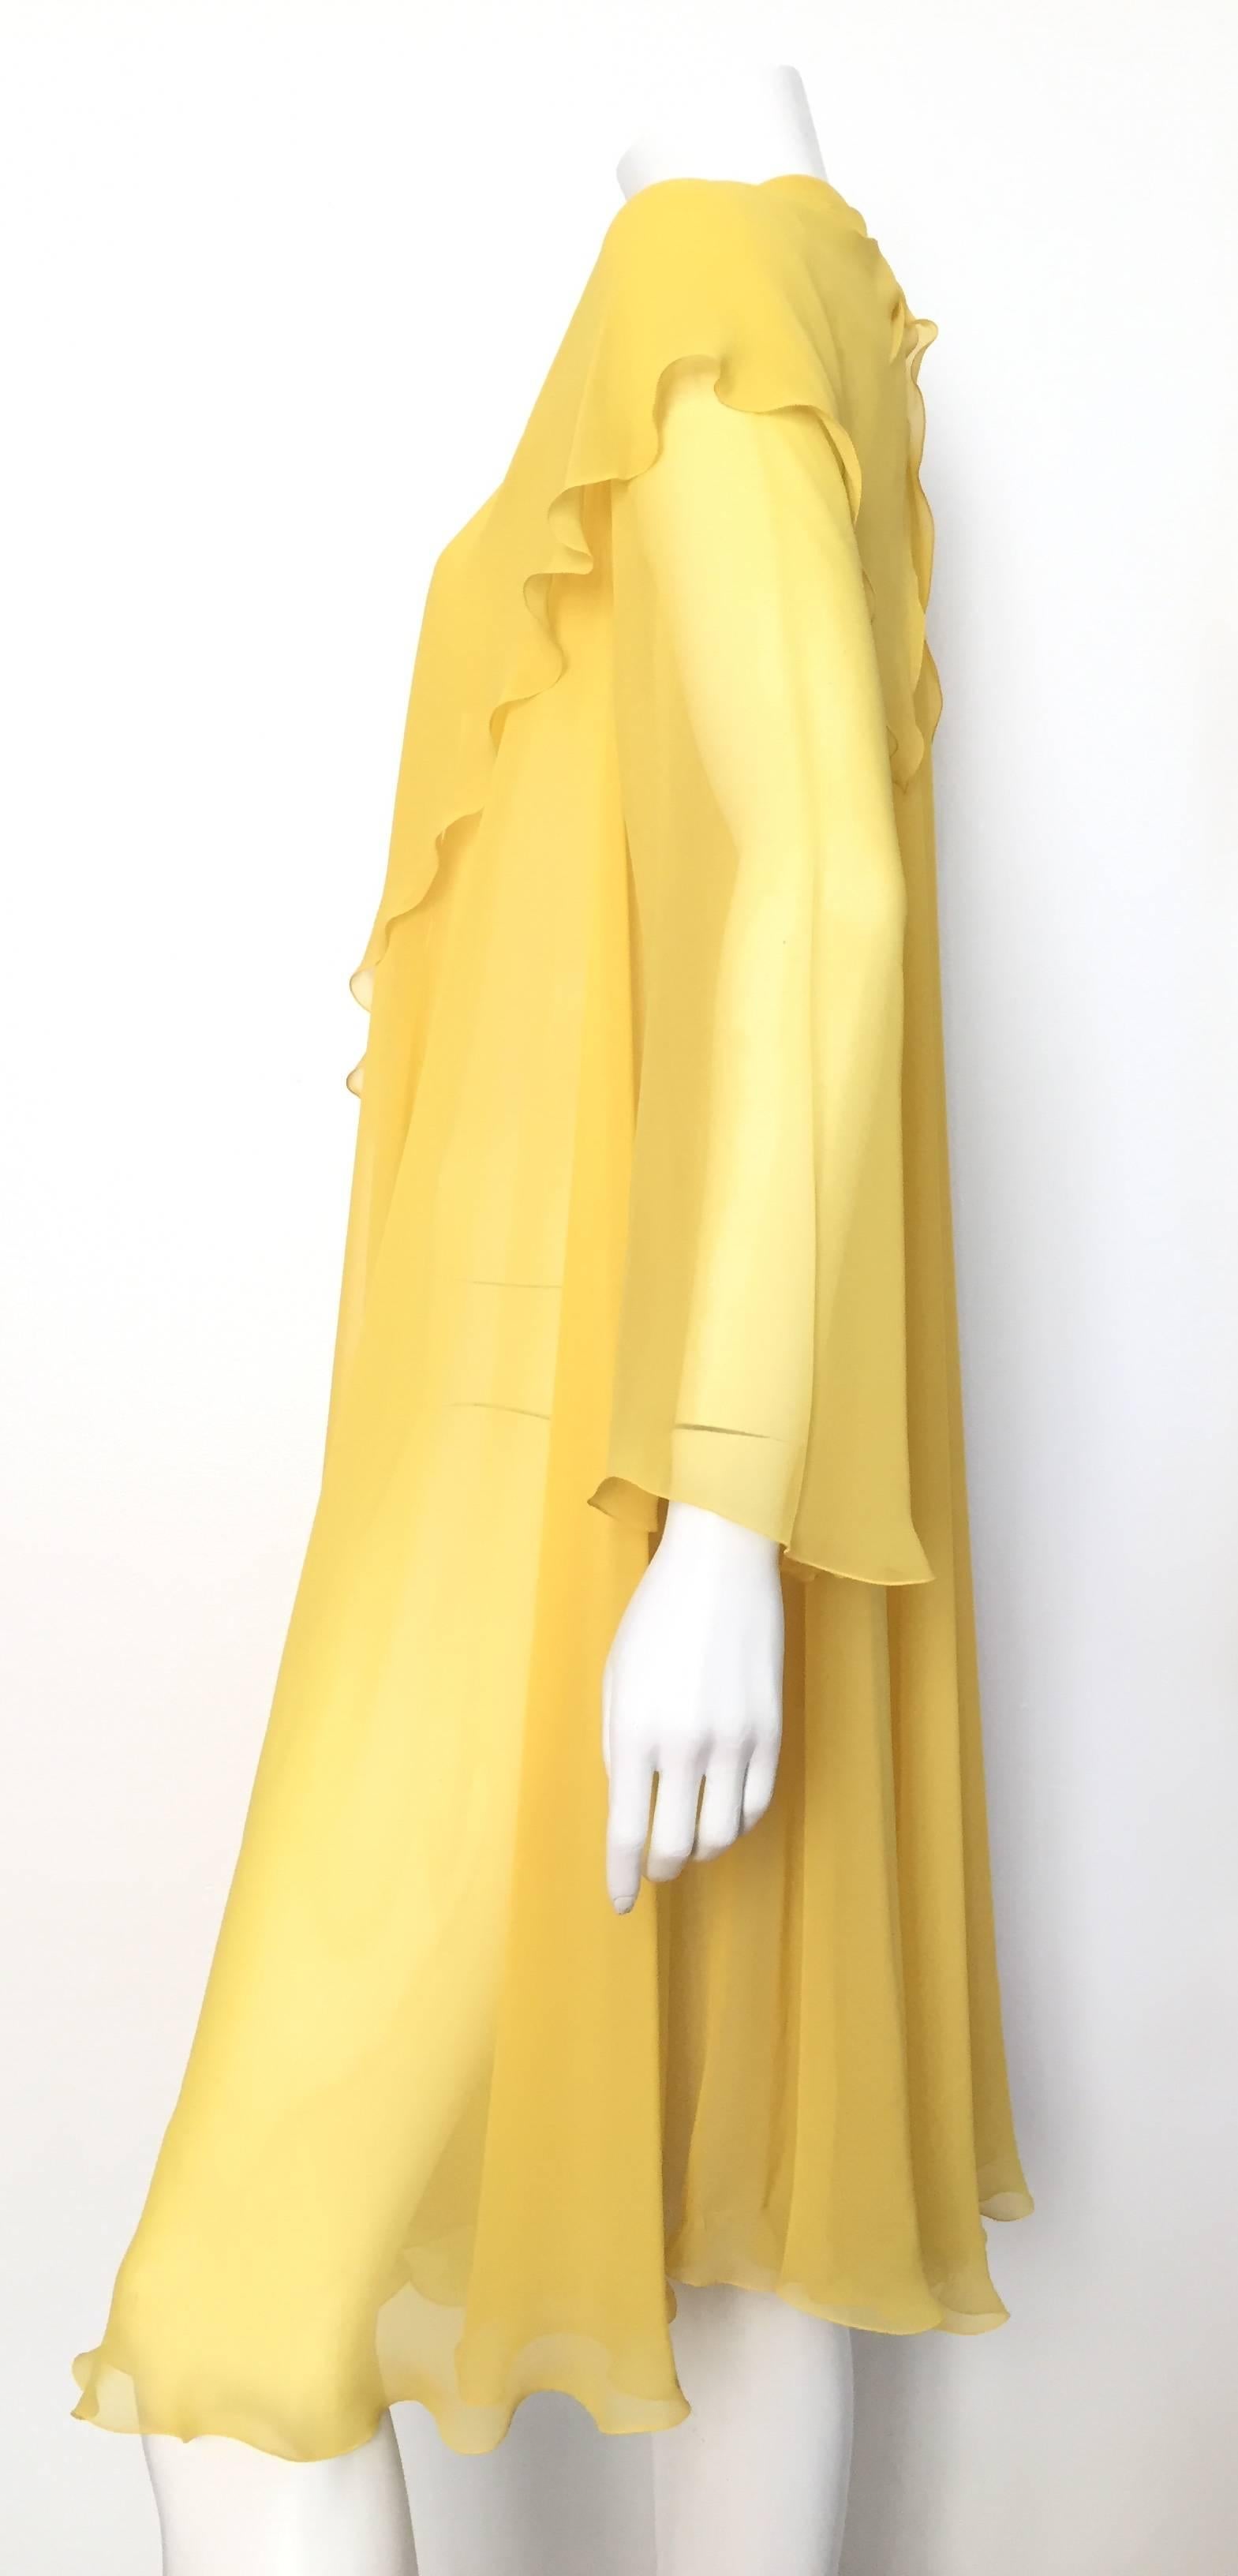 Loris Azzaro 1980s canary yellow silk sheer lightweight jacket is a size 2 but fits this size 4 mannequin nicely. This gorgeous canary yellow lightweight jacket is perfect to wear with your LBD, jumpsuit, bathing suit, blouse & jeans or just